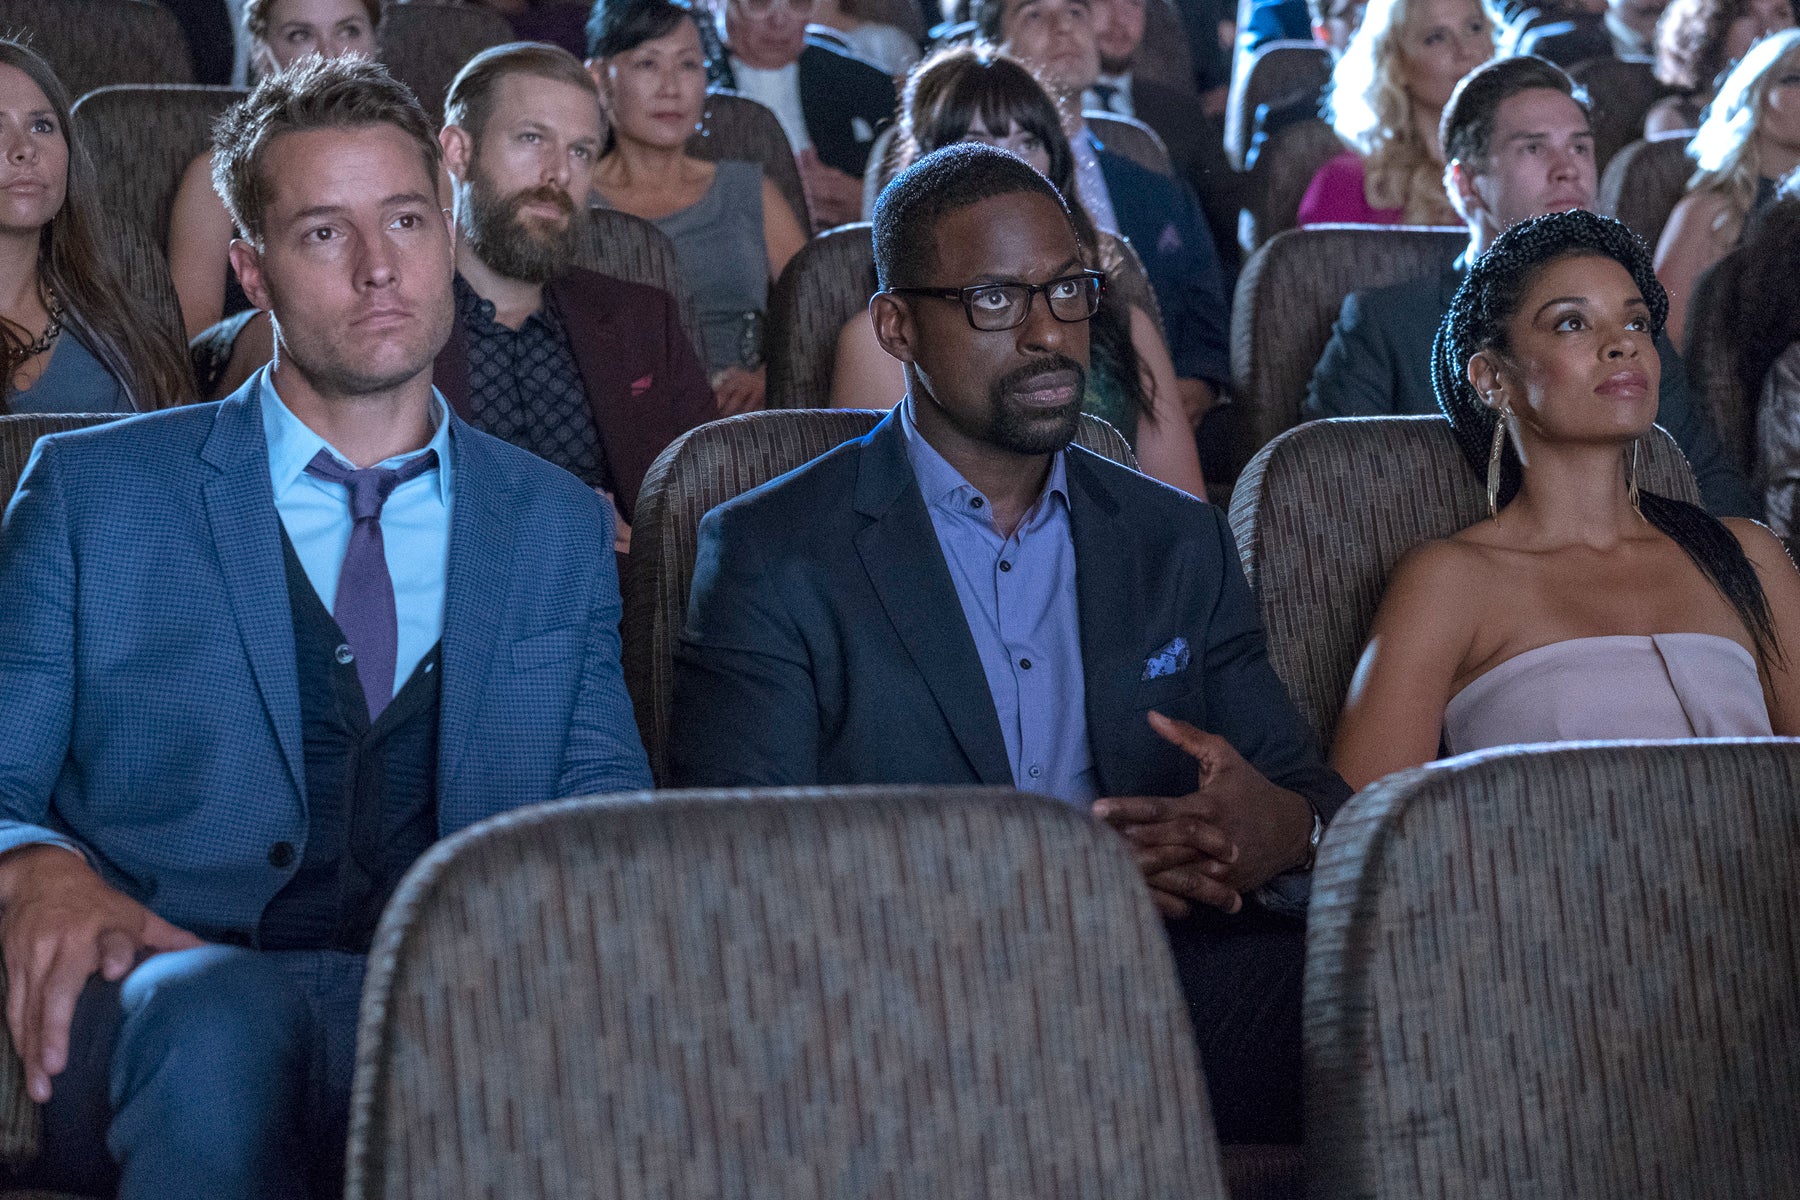 Kevin (Justin Hartley), Randall (Sterling K. Brown), and Beth Pearson (Susan Kelechi Watson) sit in a dark, crowded theater in an episode of This Is Us.